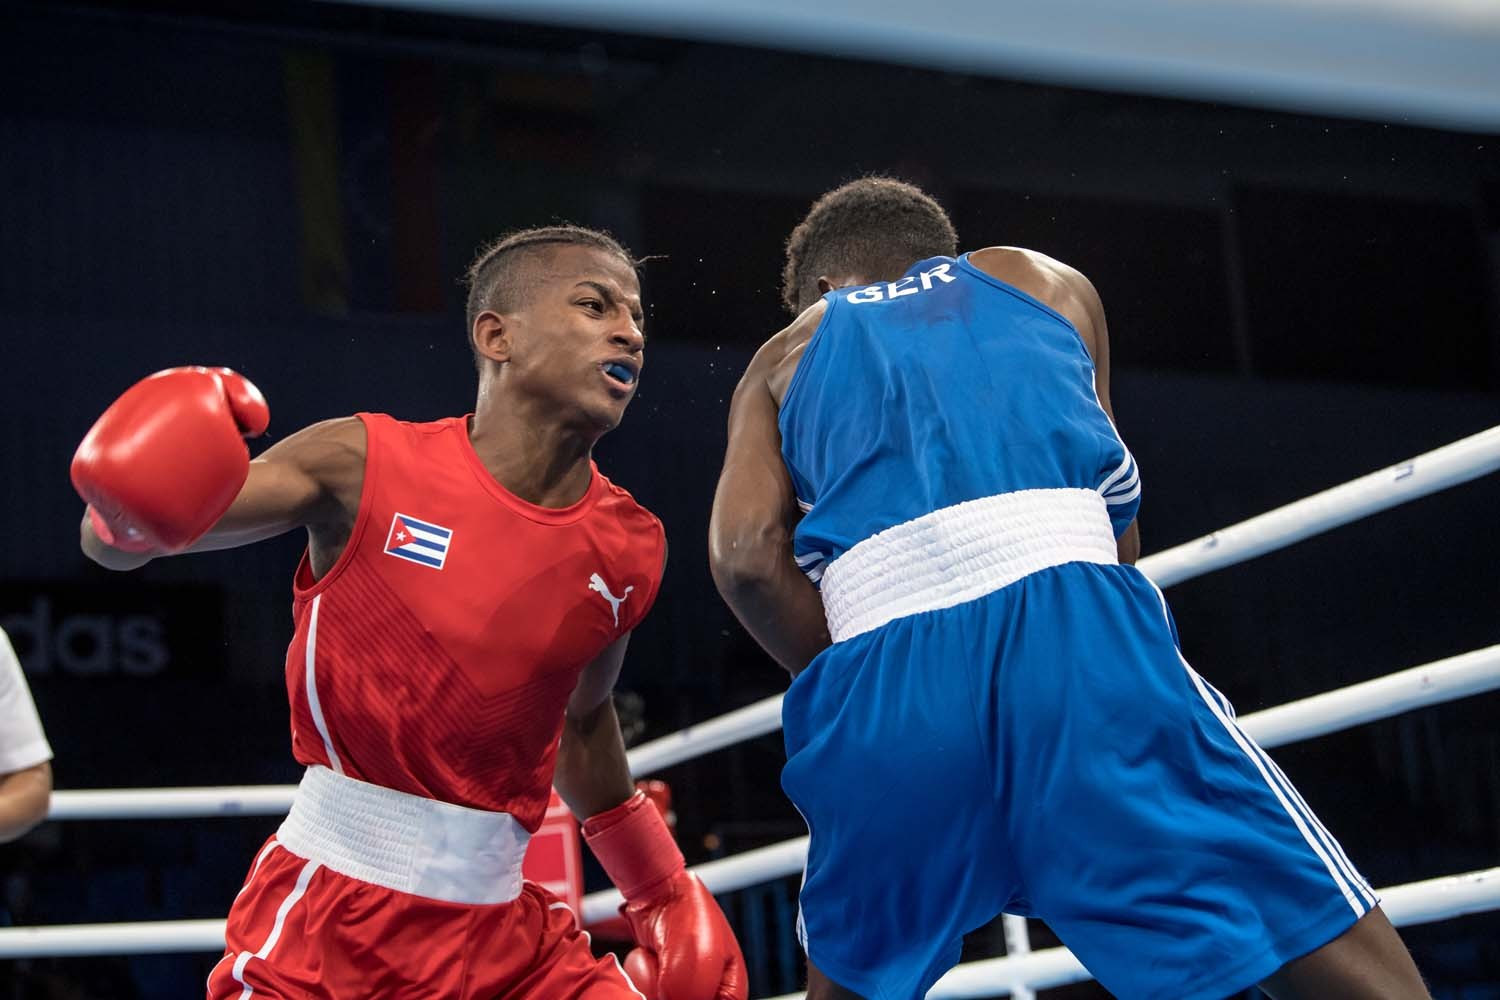 He remains on course to meet defending world champion Joahnys Argilagos in the final after the Cuban beat Germany's Salah Ibrahim Omar 5-0 ©AIBA